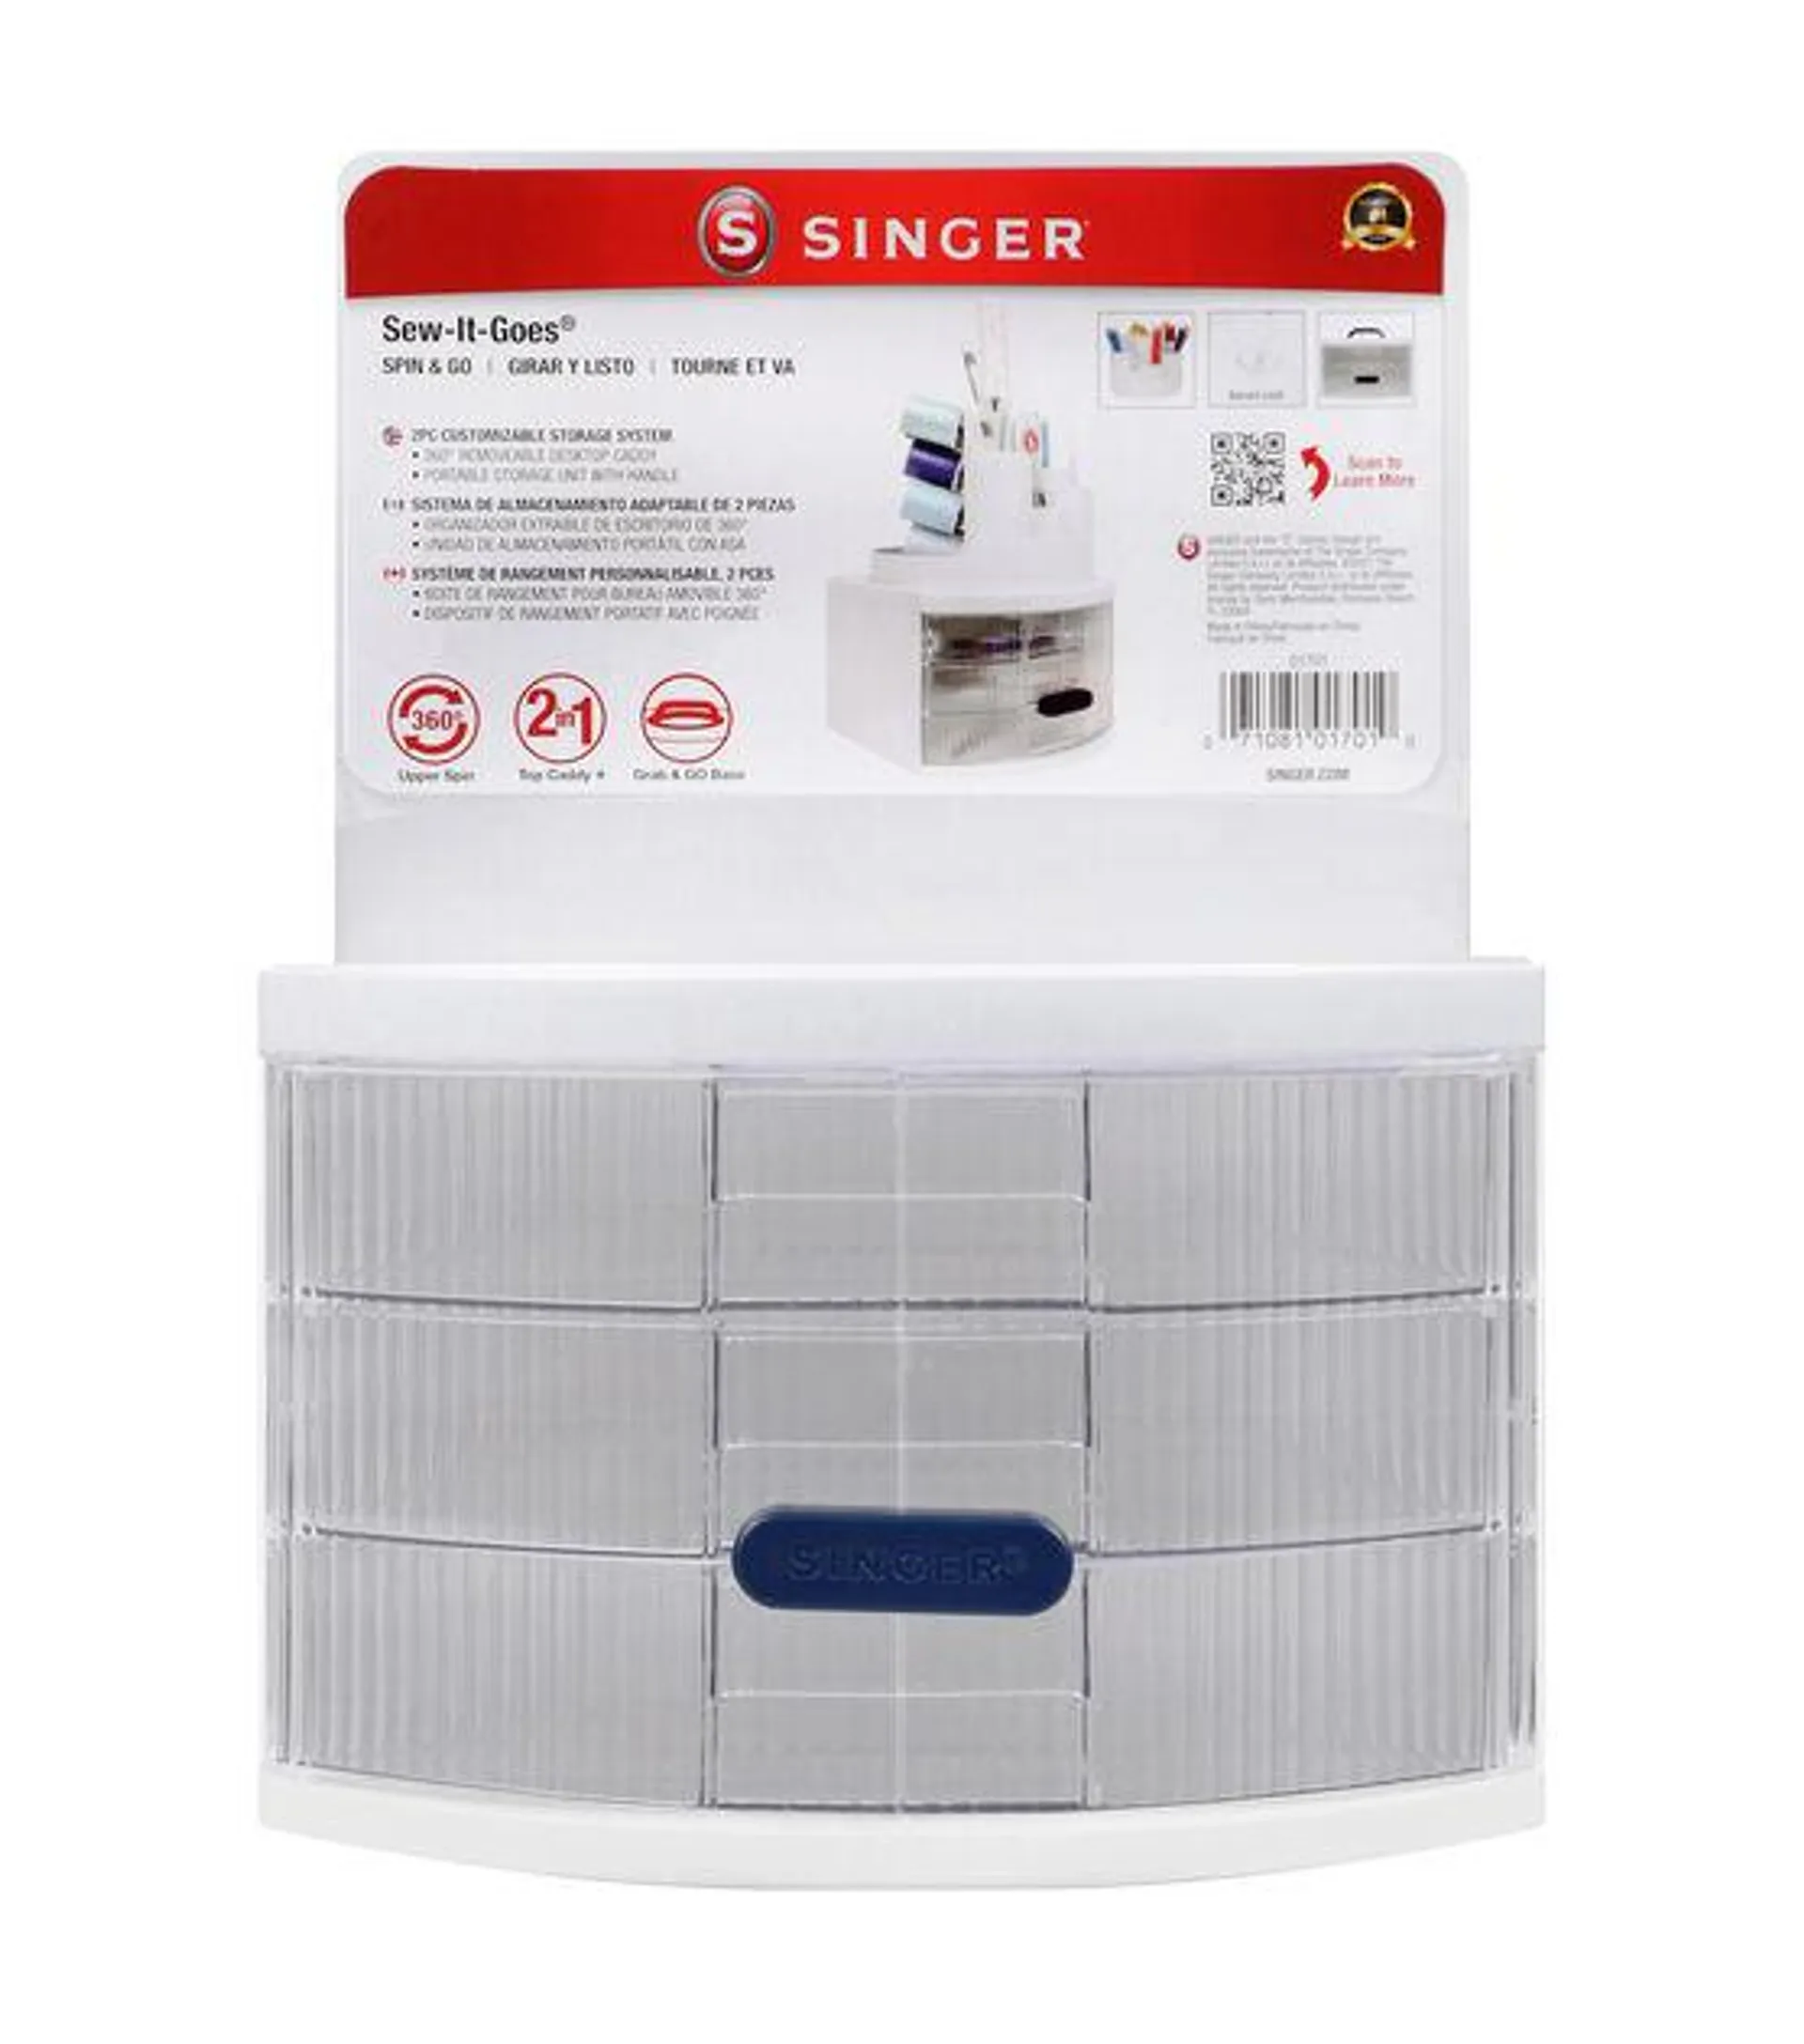 SINGER Sew-It-Goes Spin & Go Sewing Storage Container